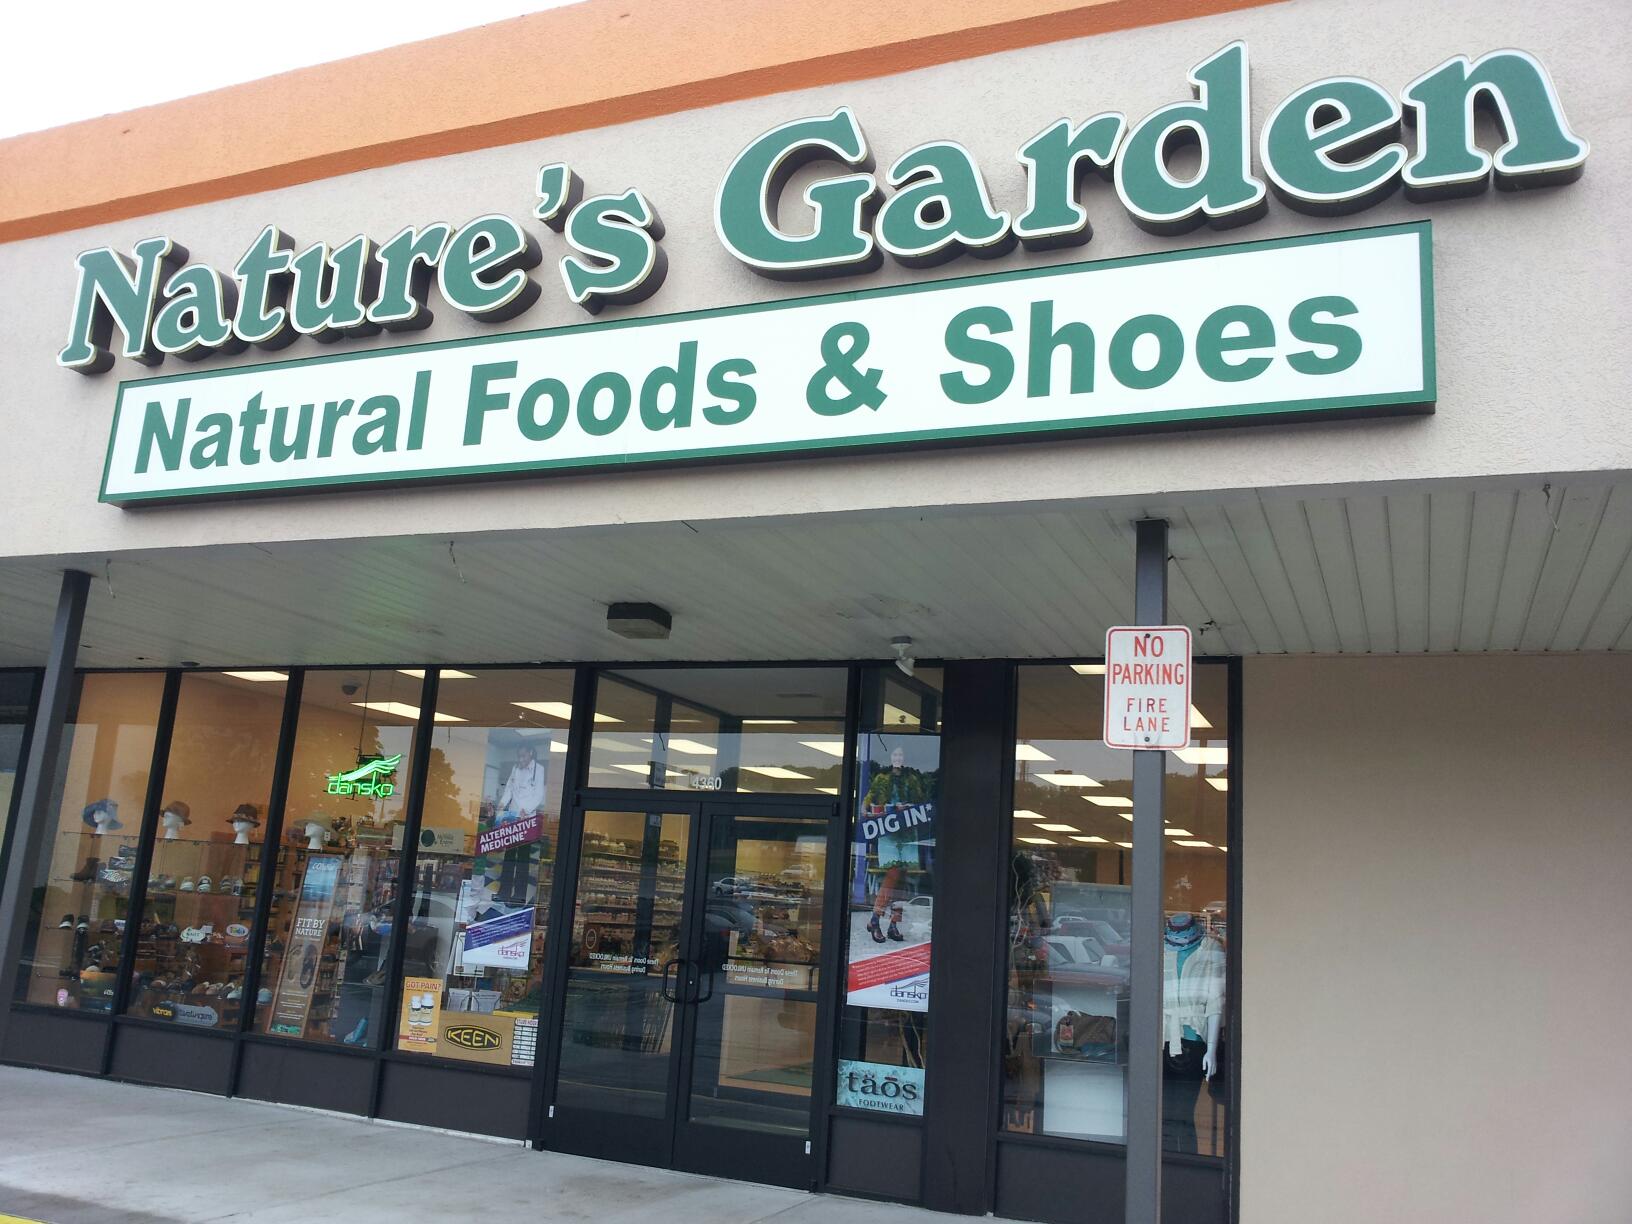 Nature's Garden Natural Foods & Shoes